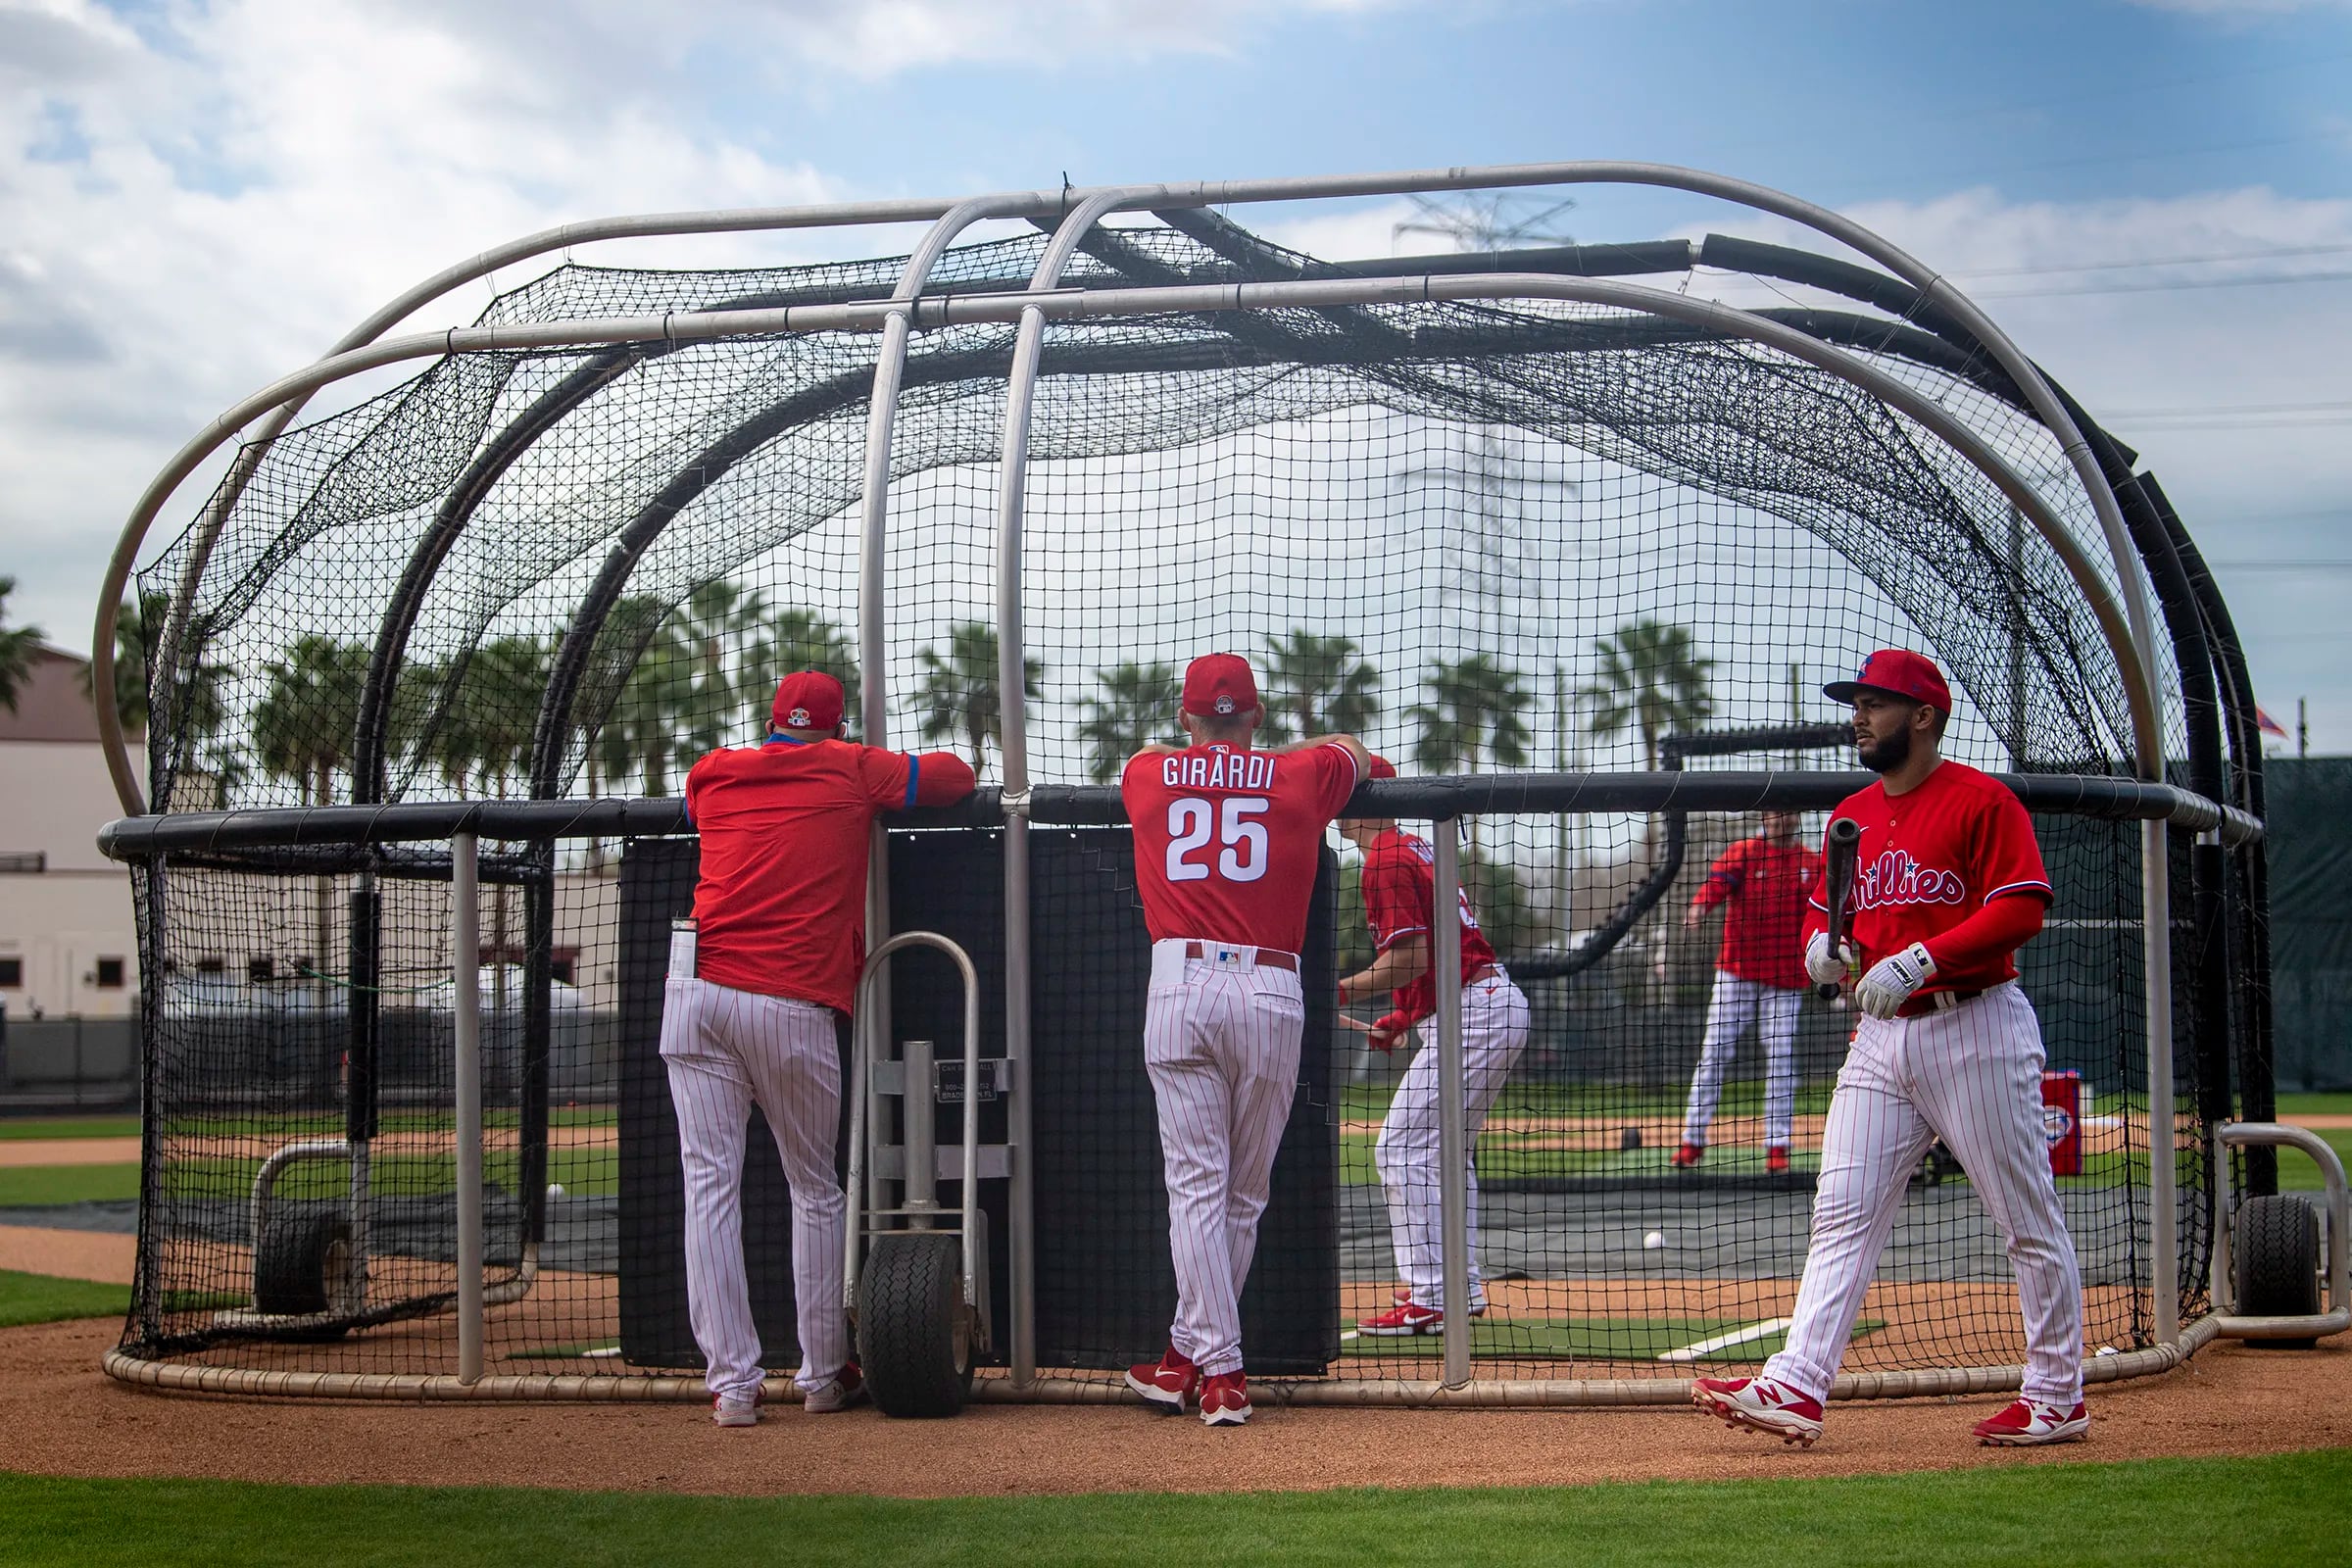 Phillies start their spring training workout in Clearwater